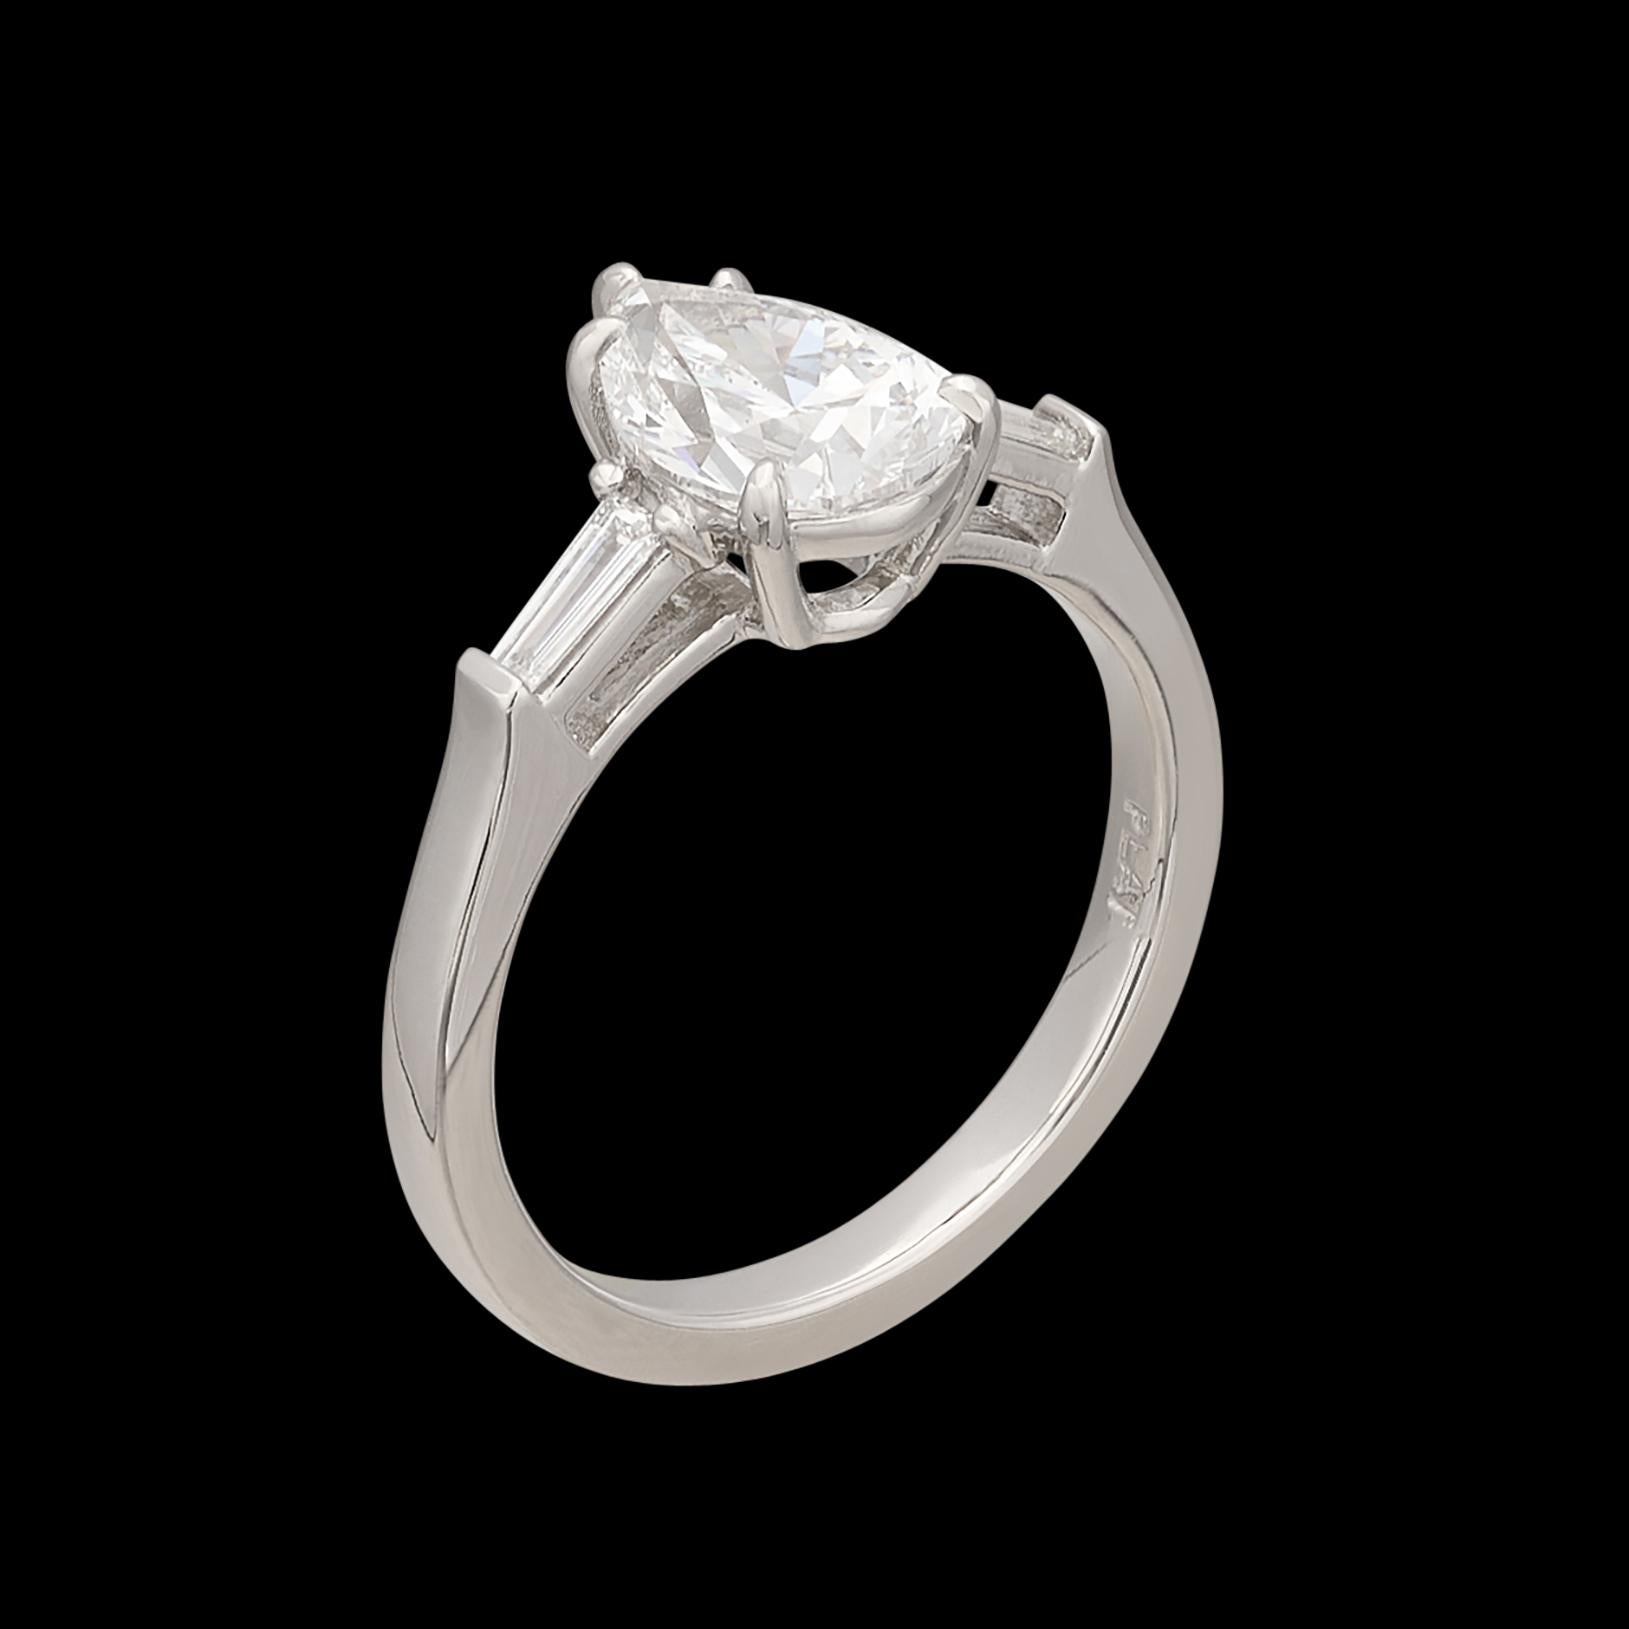 Incredible Platinum 1.50ct GIA D/Internally Flawless Pear Diamond Ring For Sale 2